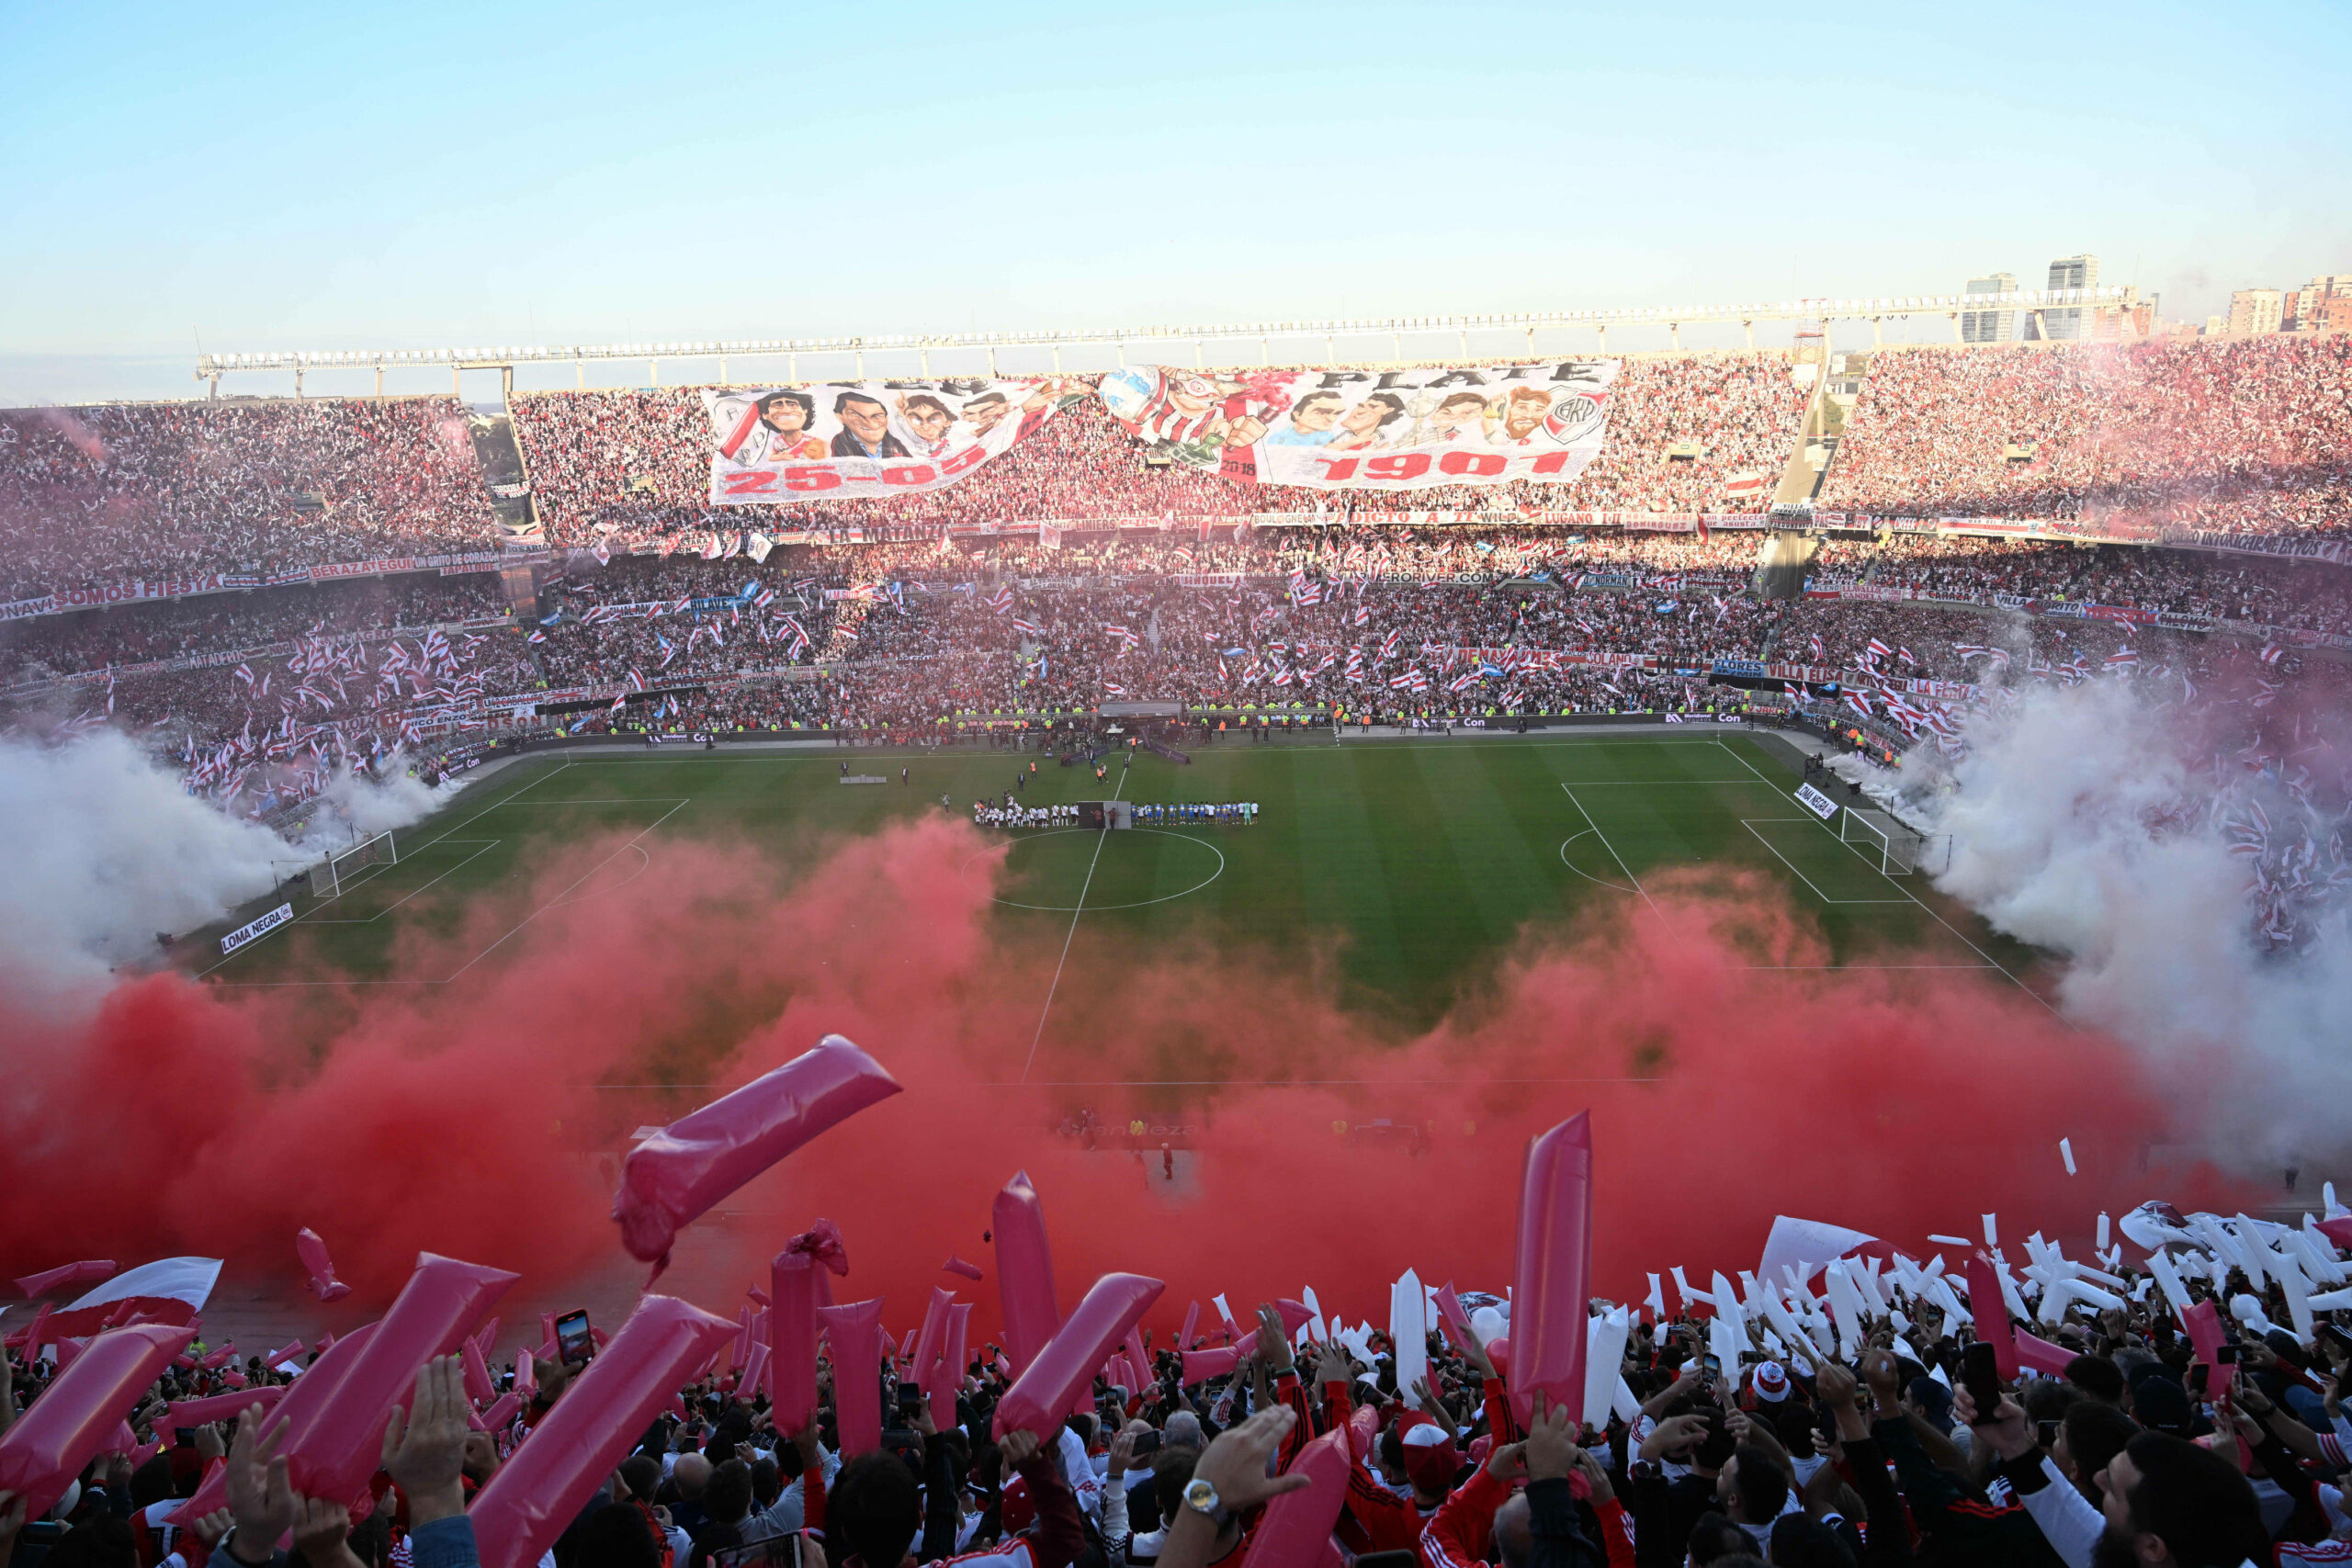 River-Plate-Stadion in Buenos Aires